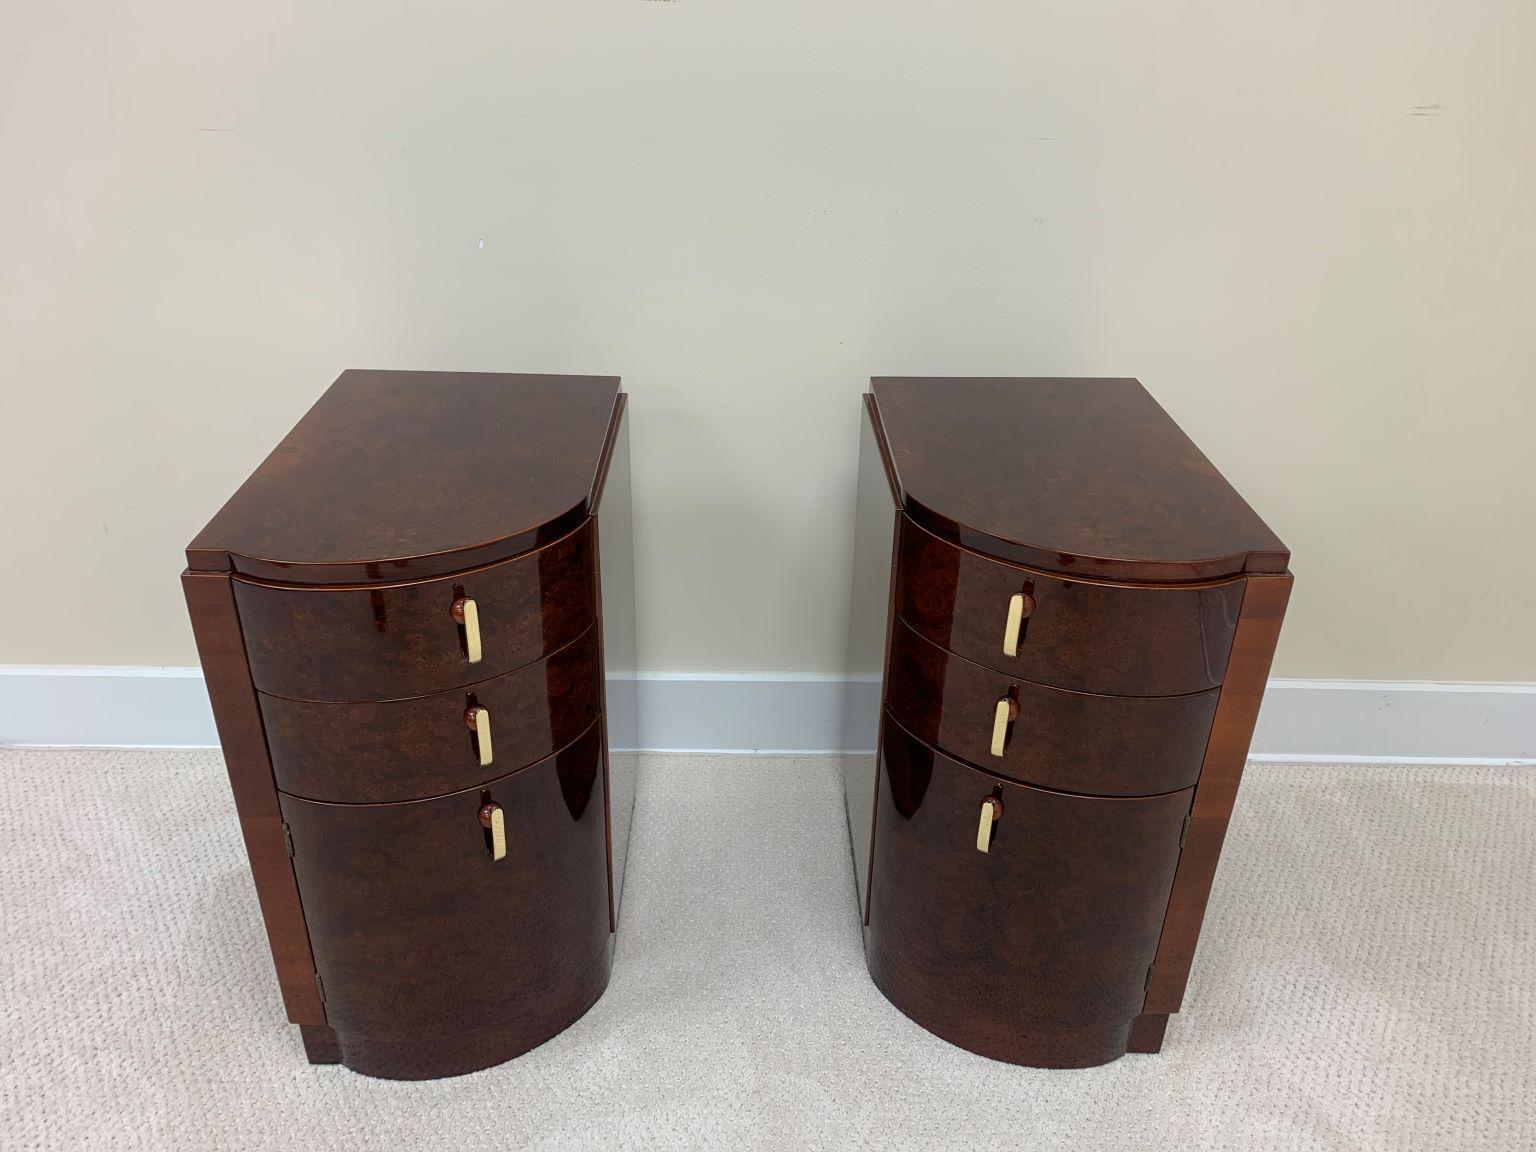 Machine Age Art Deco burl and brass night tables circa 1930s. Beautiful and functional set of left and right tables. These gorgeous burl and mahogany woods are accented by solid brass and Bakelite handles. With two drawers and a door these tables